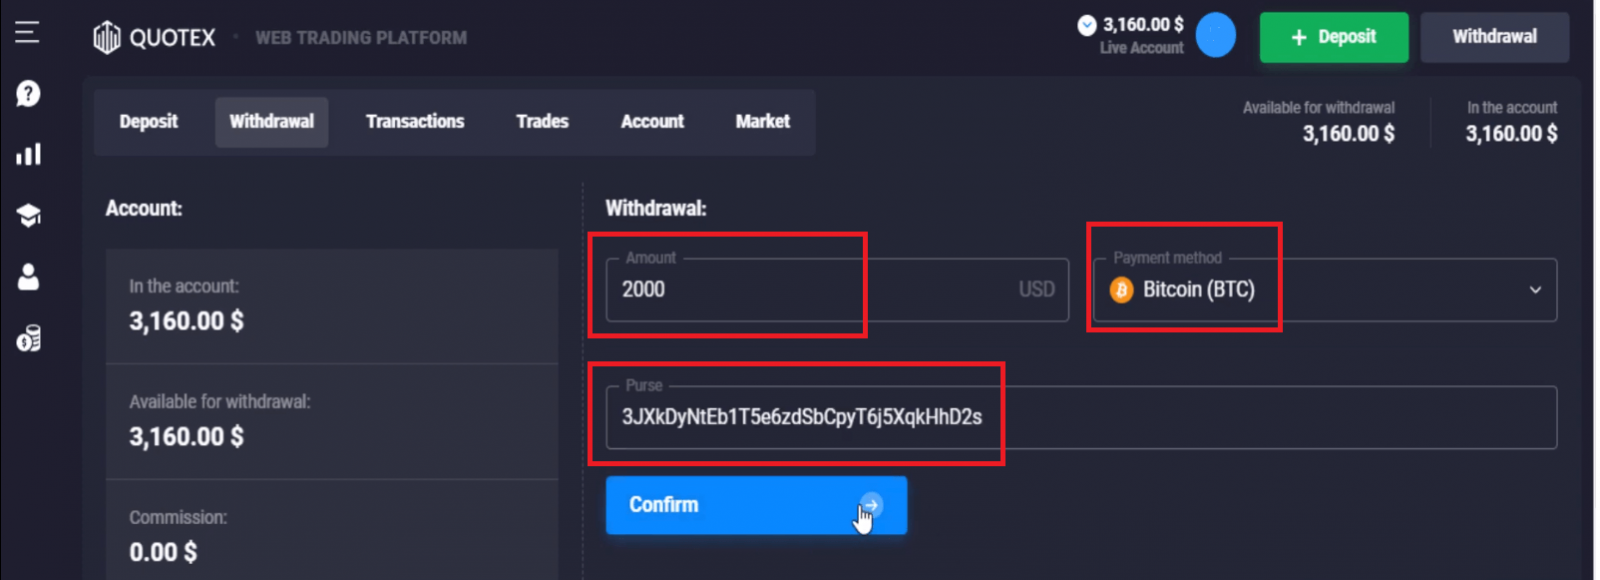 How to Trade Digital Options and Withdraw Money from Quotex